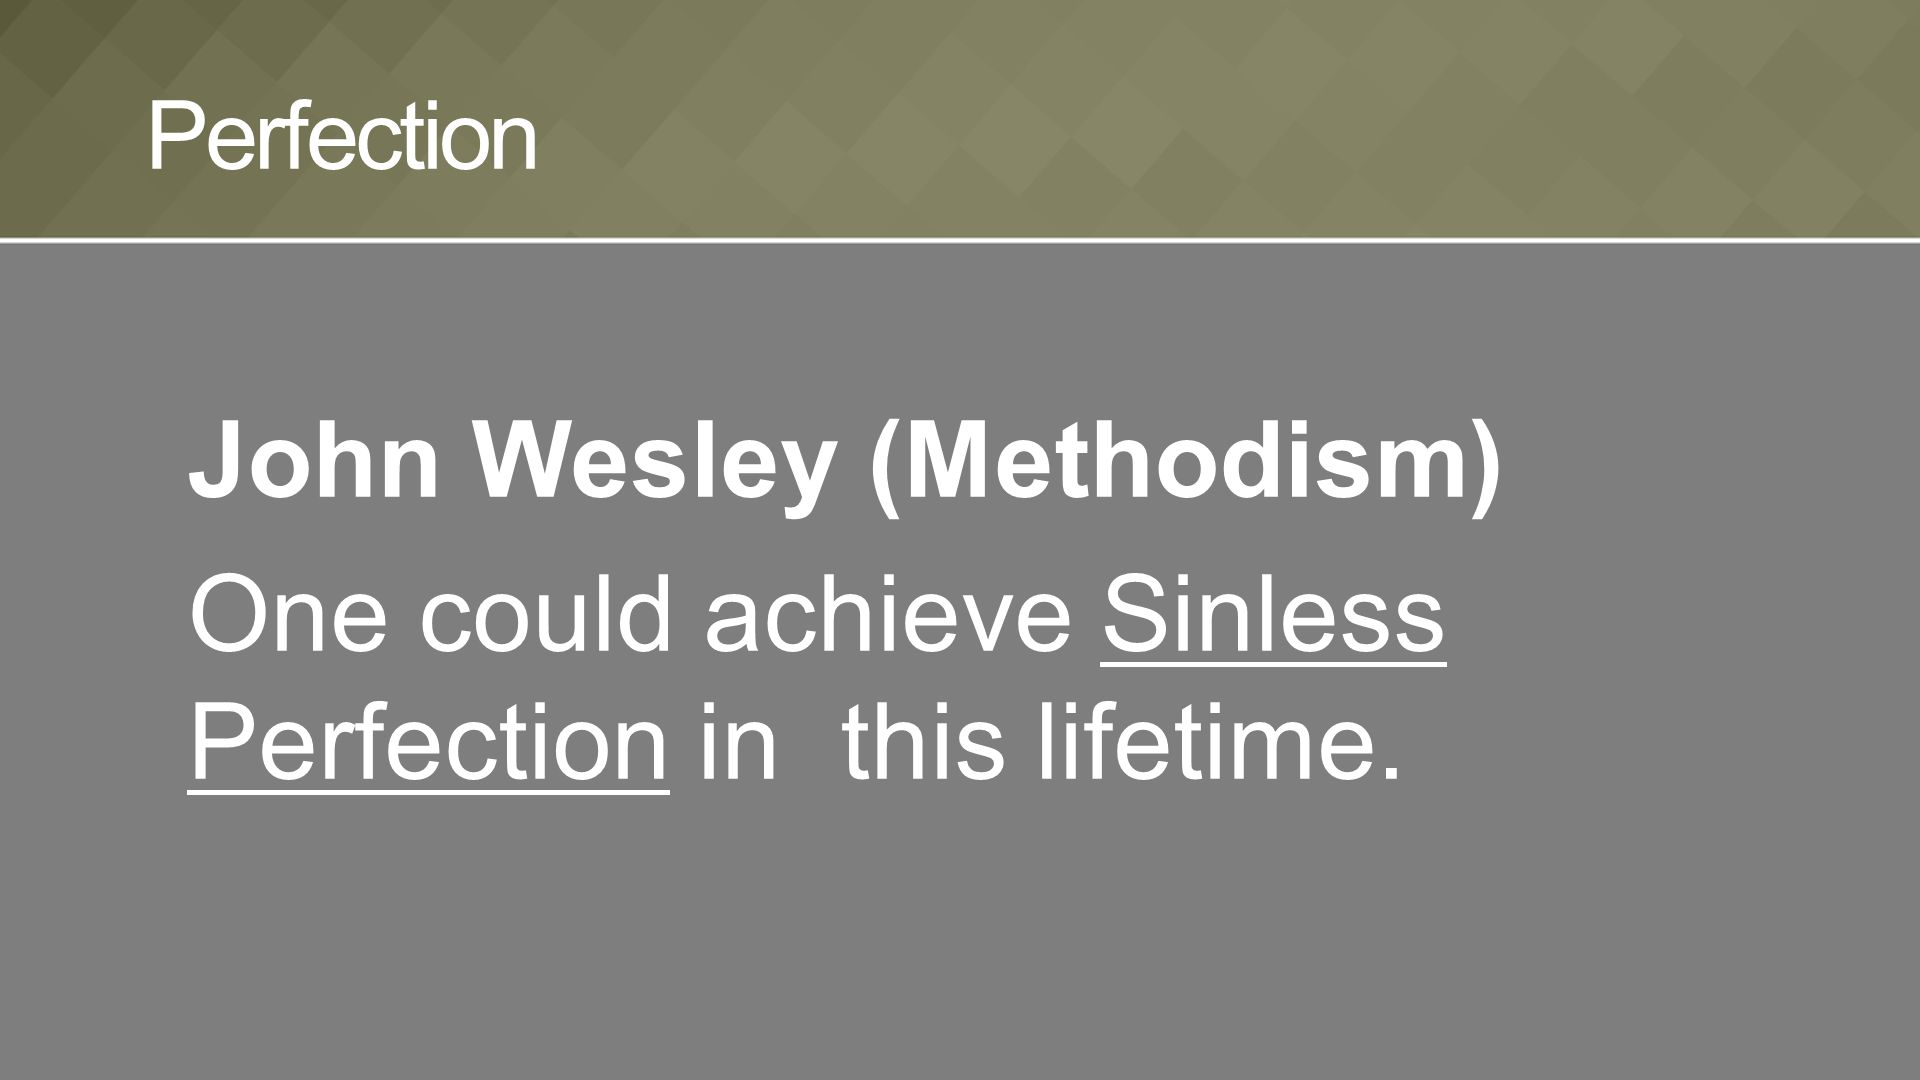 John Wesley (Methodism) One could achieve Sinless Perfection in this lifetime. Perfection